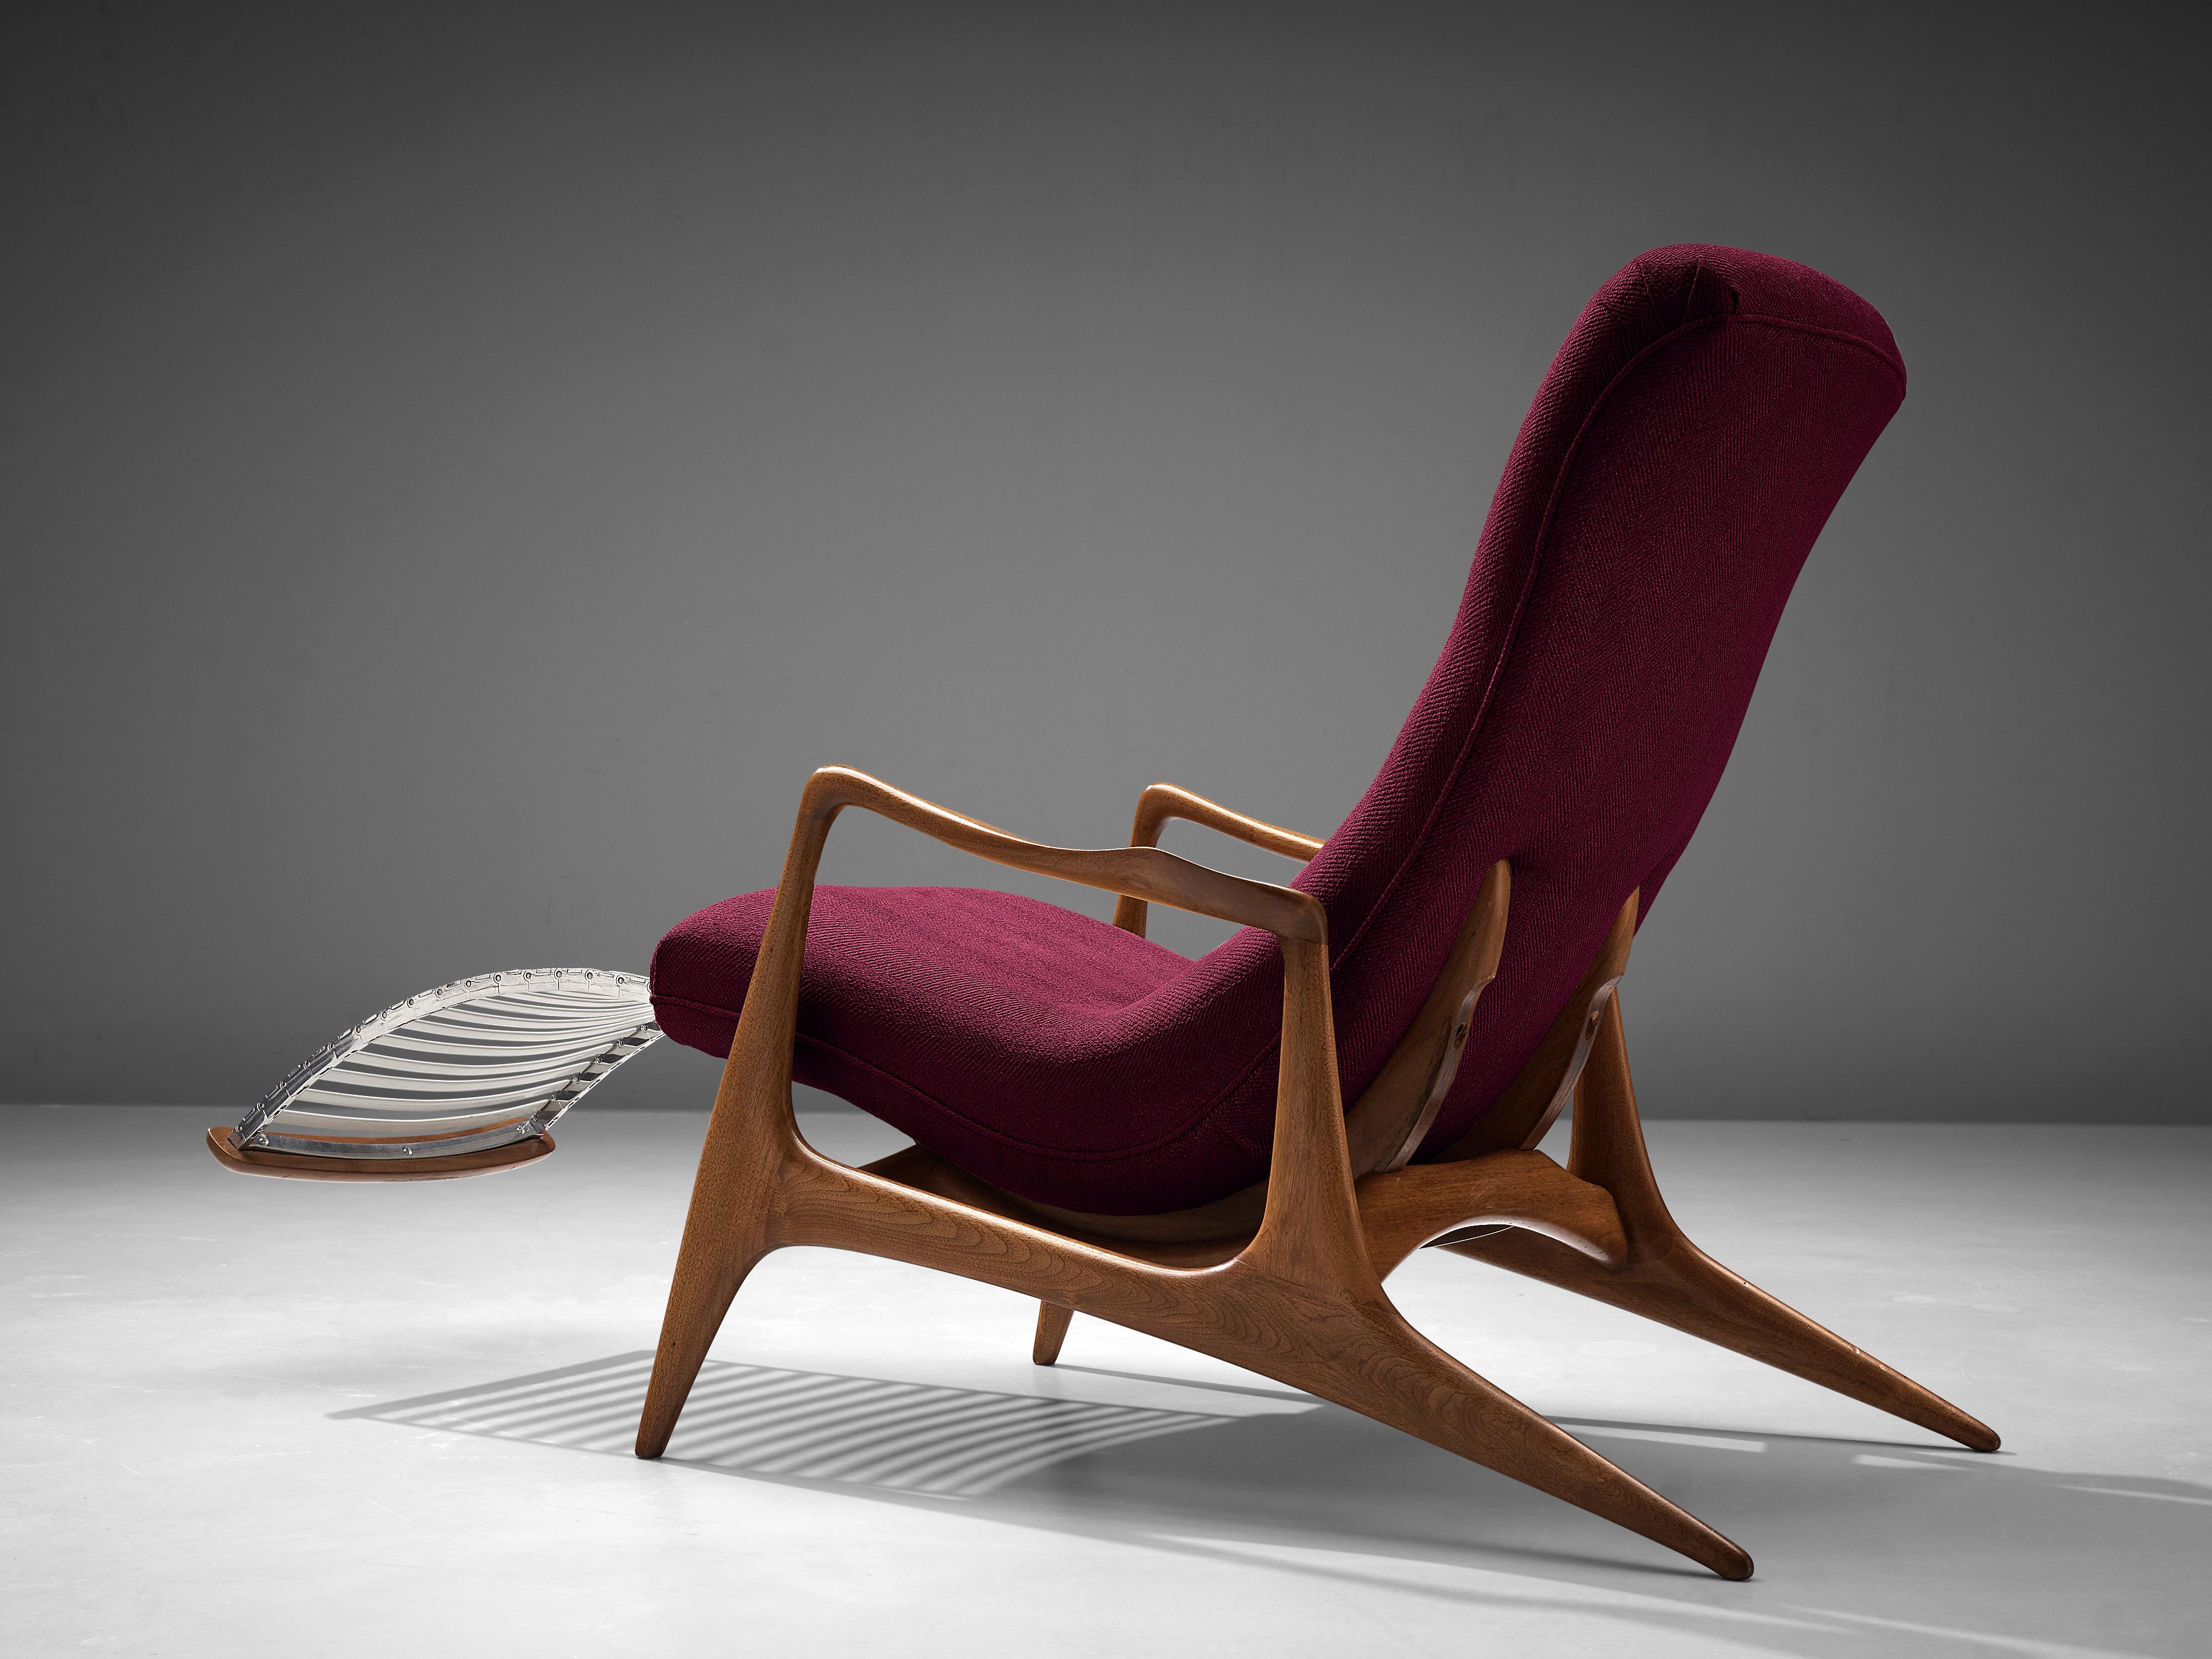 Vladimir Kagan for Dreyfuss, 'Contour' chair model VK 100, teak, purple fabric, United States, 1950s
 
This lounge chair by Kagan is sculptural and delicate. The frame is executed in teak, carved and detailed in an exquisite manner. The back legs